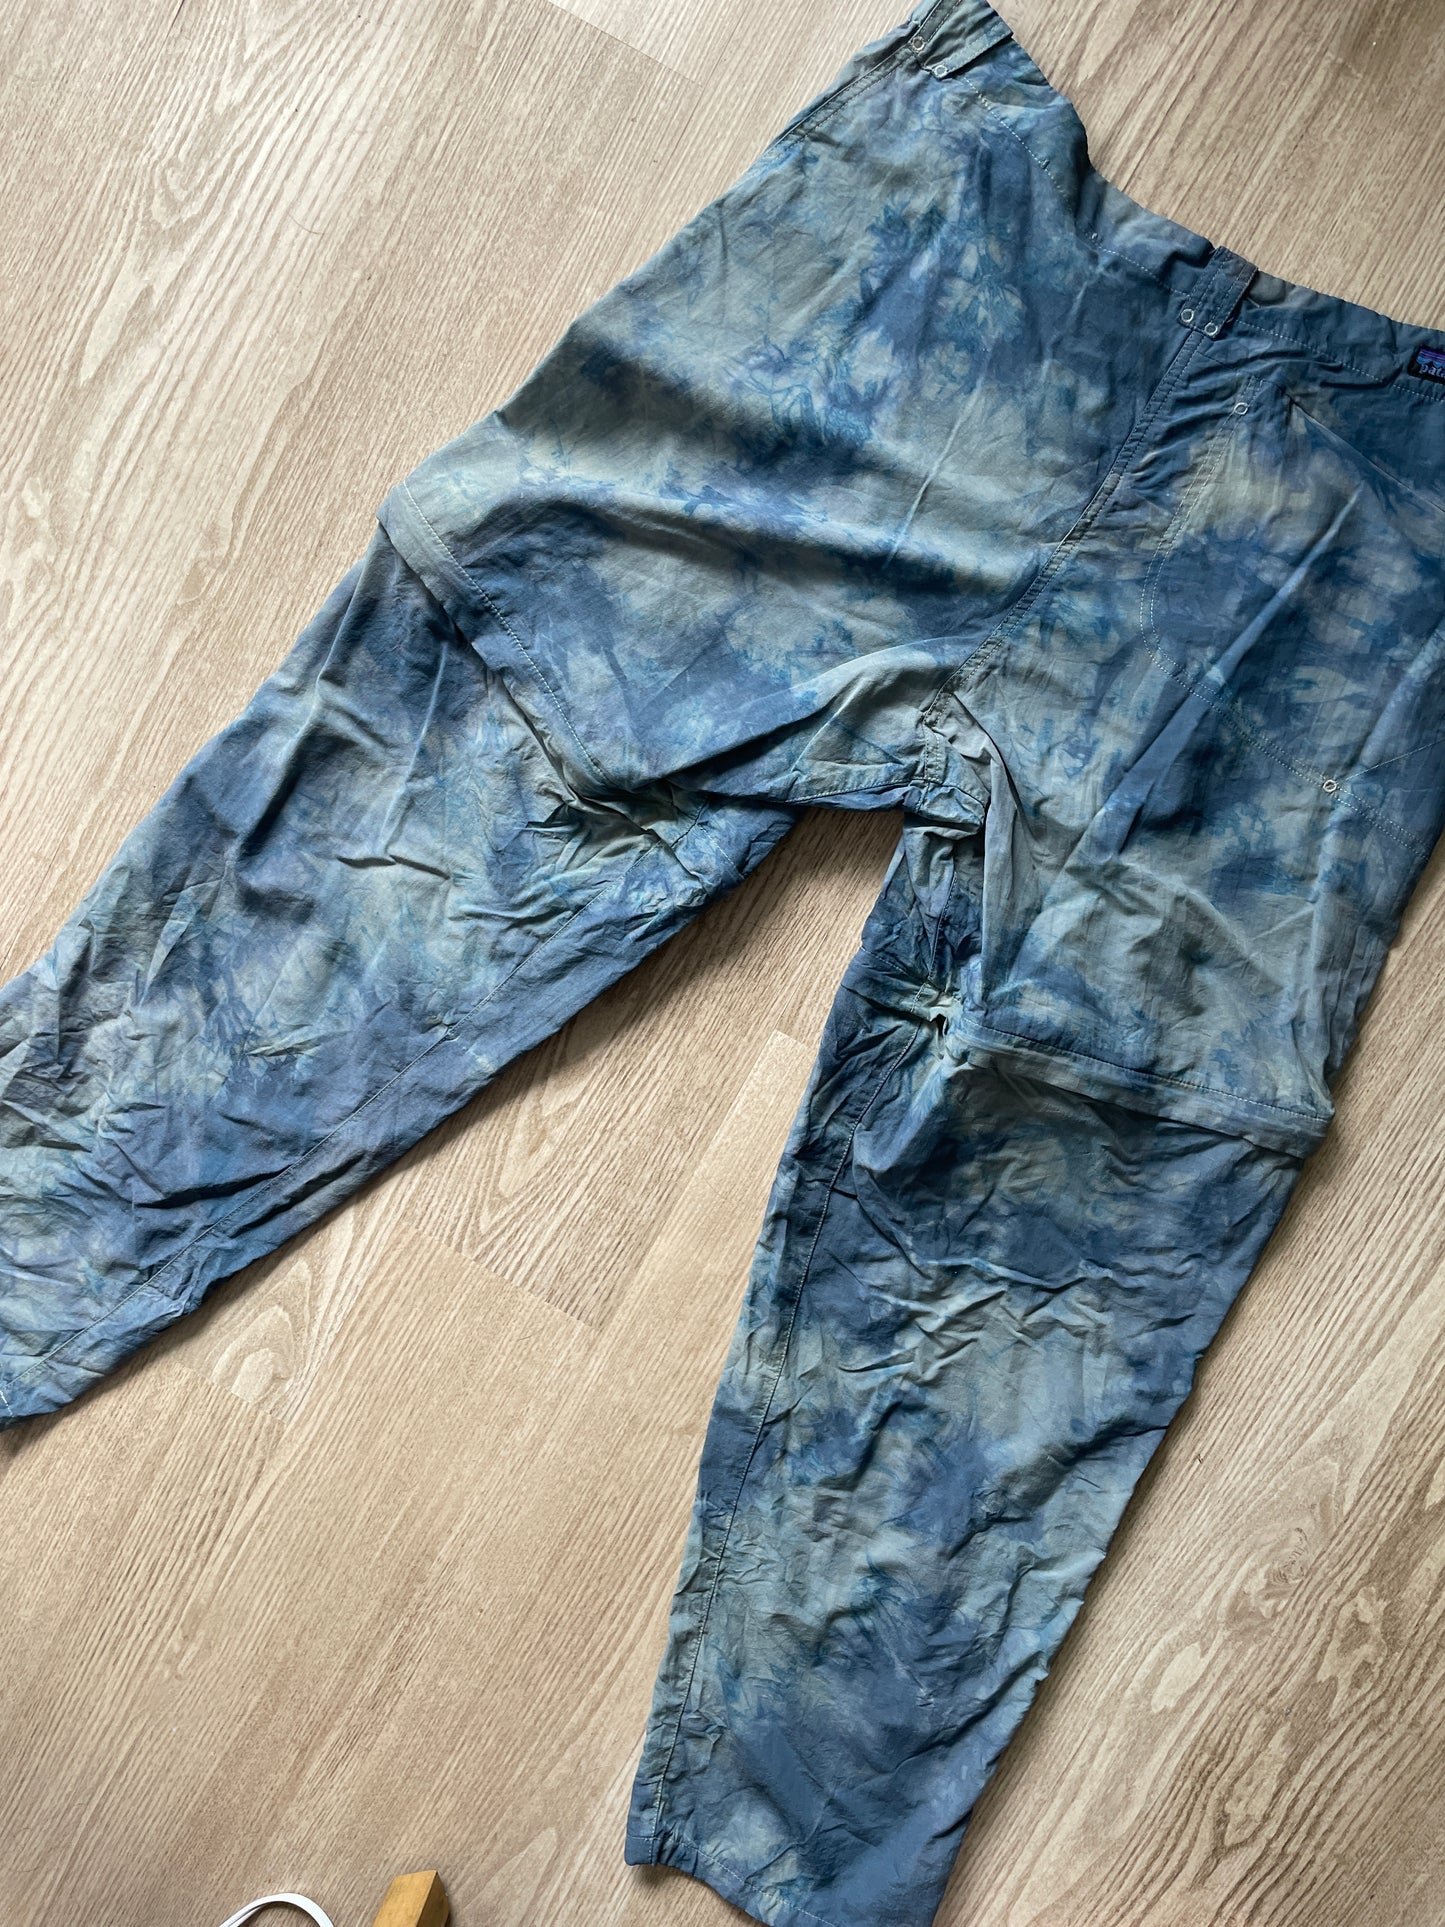 XL Men’s Patagonia Quandary Convertible Tie Dye Pants with Handprinted Graphics | One-Of-a-Kind Upcycled Blue and Gray Crumpled Pant/Short Combo